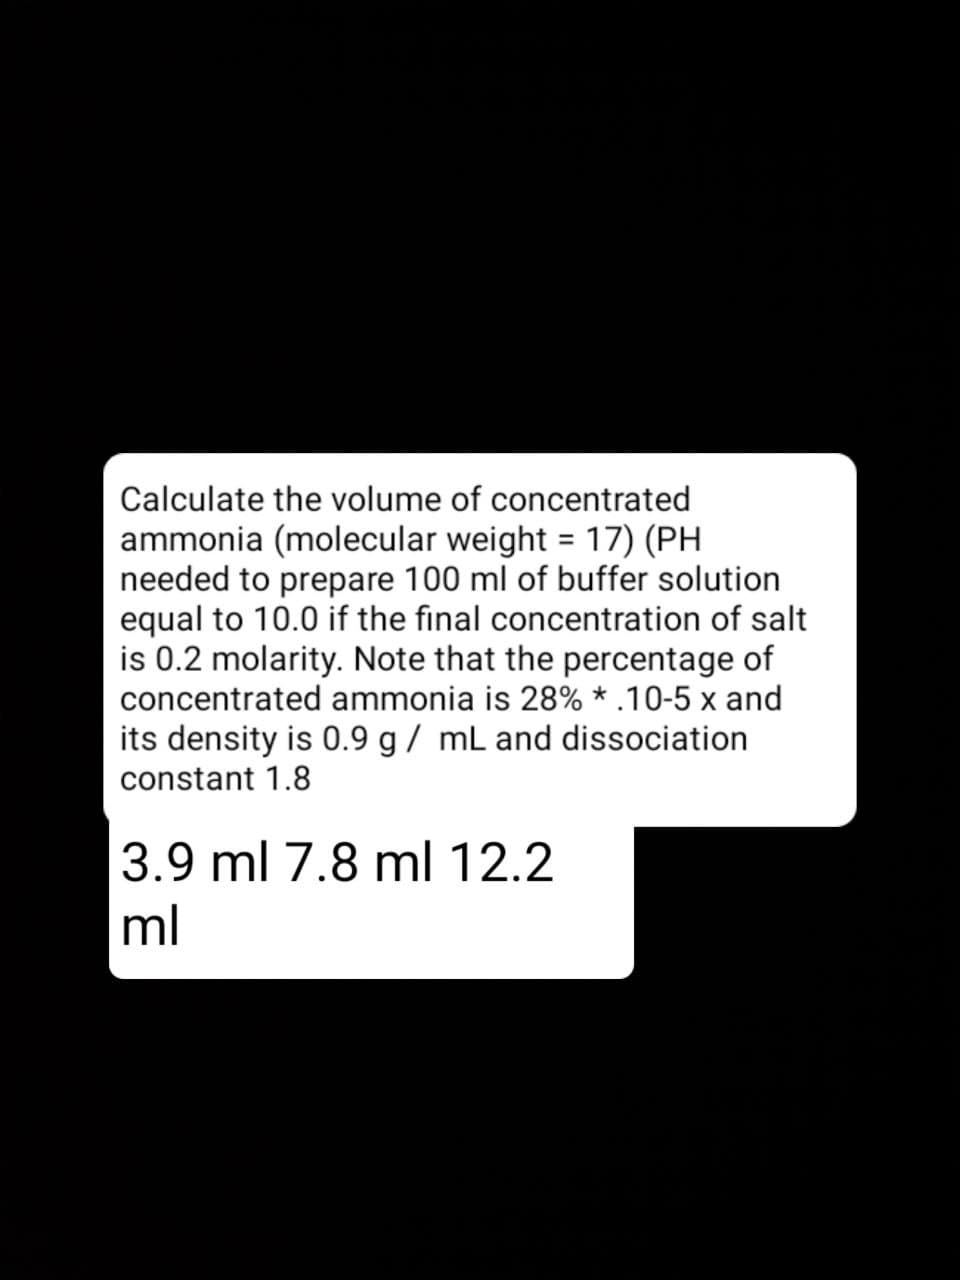 Calculate the volume of concentrated
ammonia (molecular weight = 17) (PH
needed to prepare 100 ml of buffer solution
equal to 10.0 if the final concentration of salt
is 0.2 molarity. Note that the percentage of
concentrated ammonia is 28% * .10-5 x and
its density is 0.9 g / mL and dissociation
%3D
constant 1.8
3.9 ml 7.8 ml 12.2
ml
